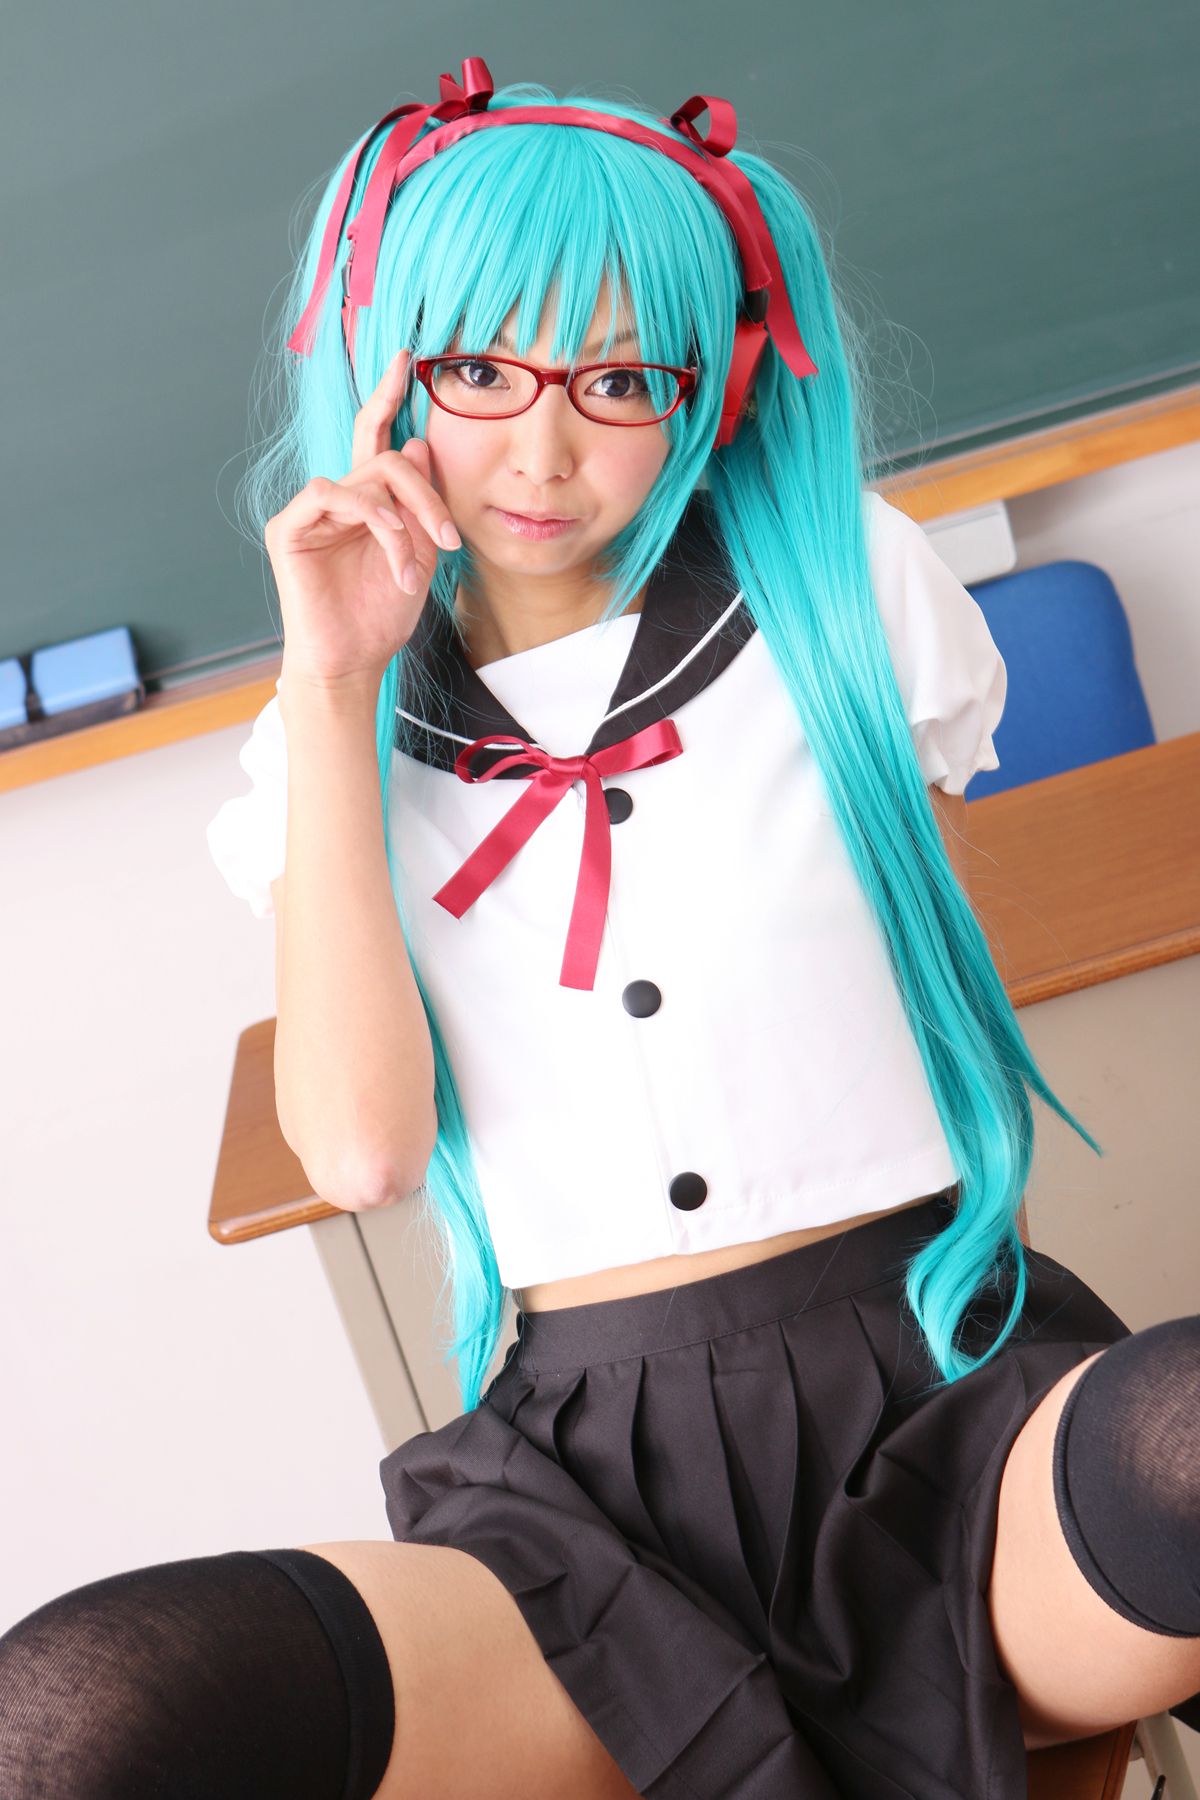 [Cosplay套图] New Hatsune Miku from Vocaloid - So Sexy[200P]